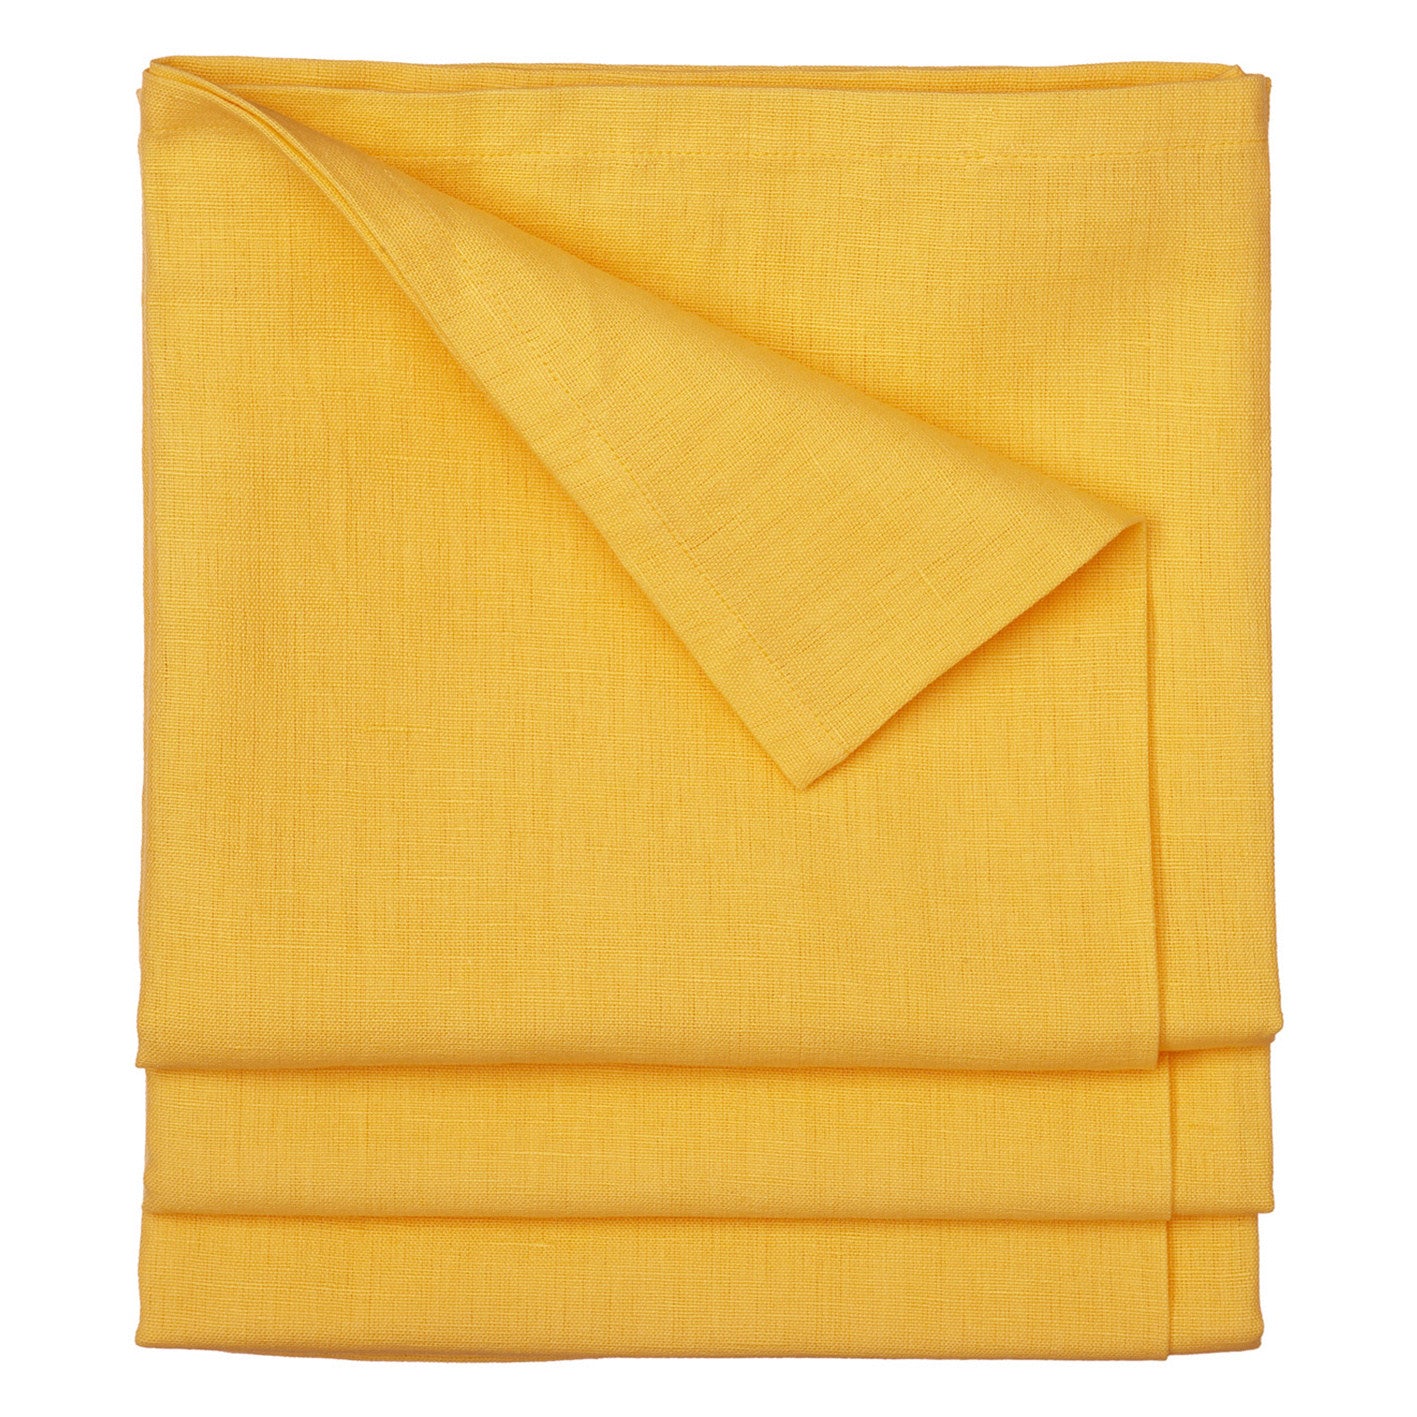 Dyed Cotton Linen Union Tablecloth in Bright Saffron Yellow Canada USA